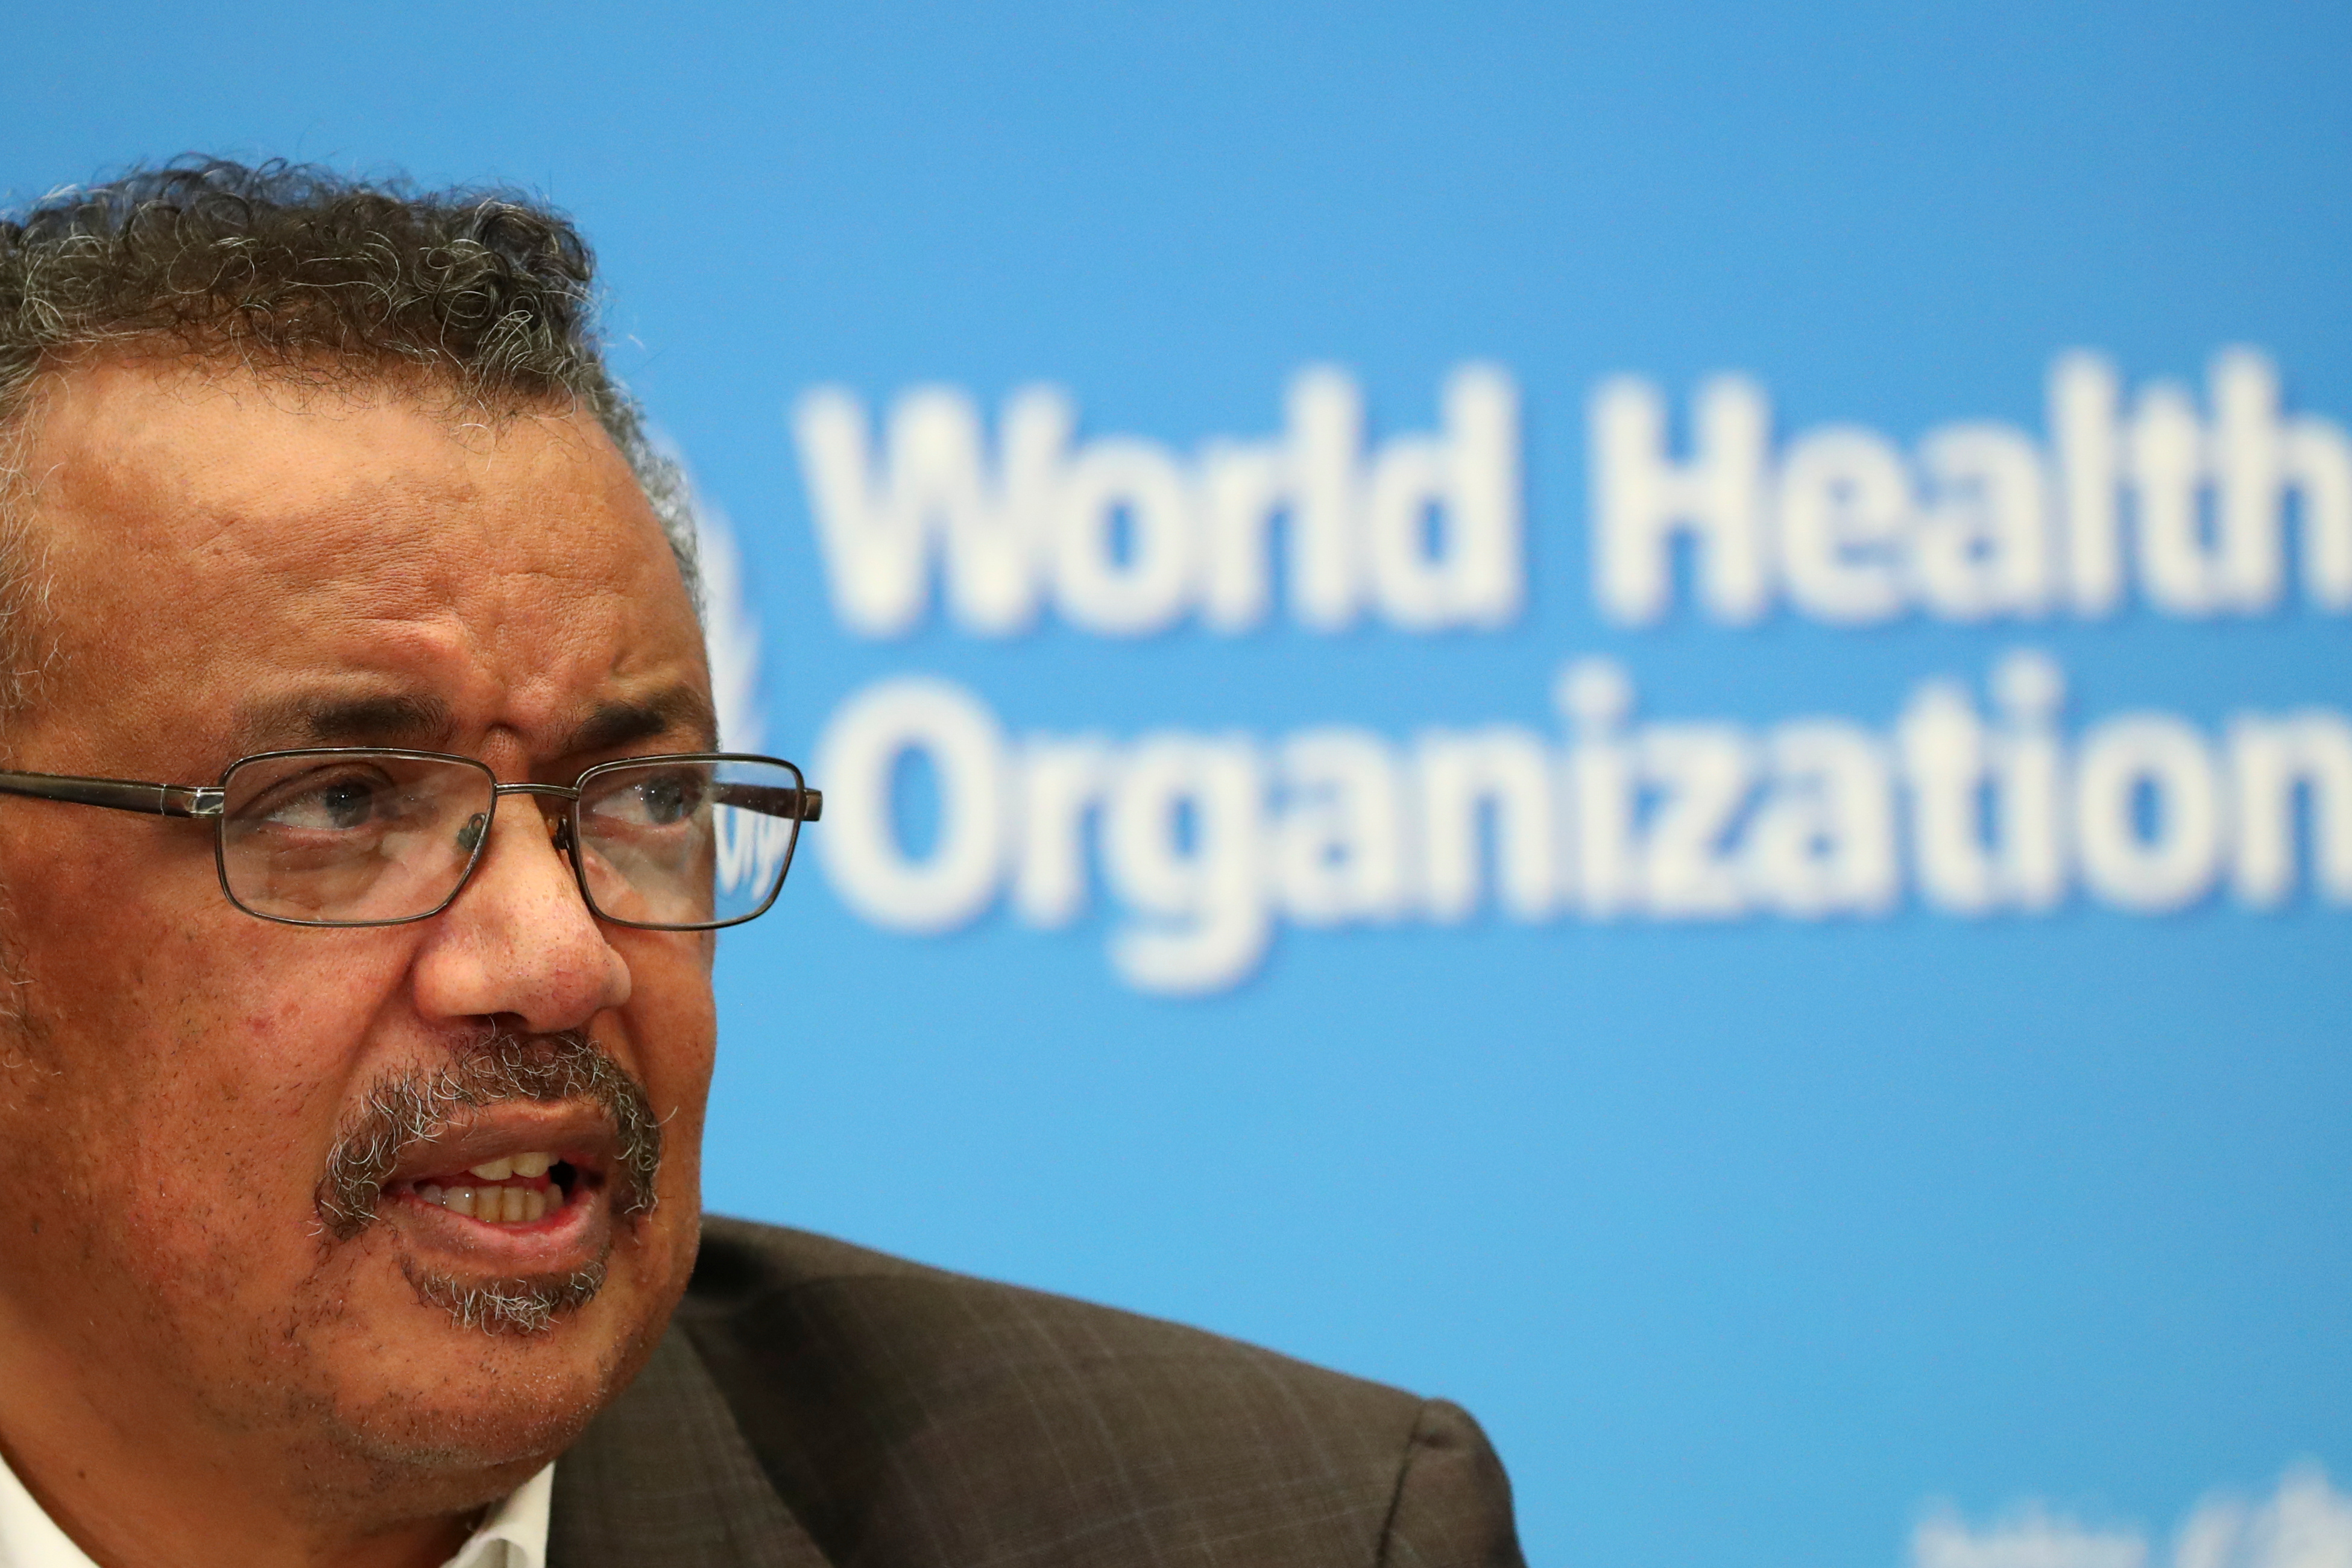 Director-General of the World Health Organization (WHO) Tedros Adhanom Ghebreyesus speaks during a news conference after a meeting of the Emergency Committee on the novel coronavirus Geneva, January 30, 2020. u00e2u20acu201d Reuters pic